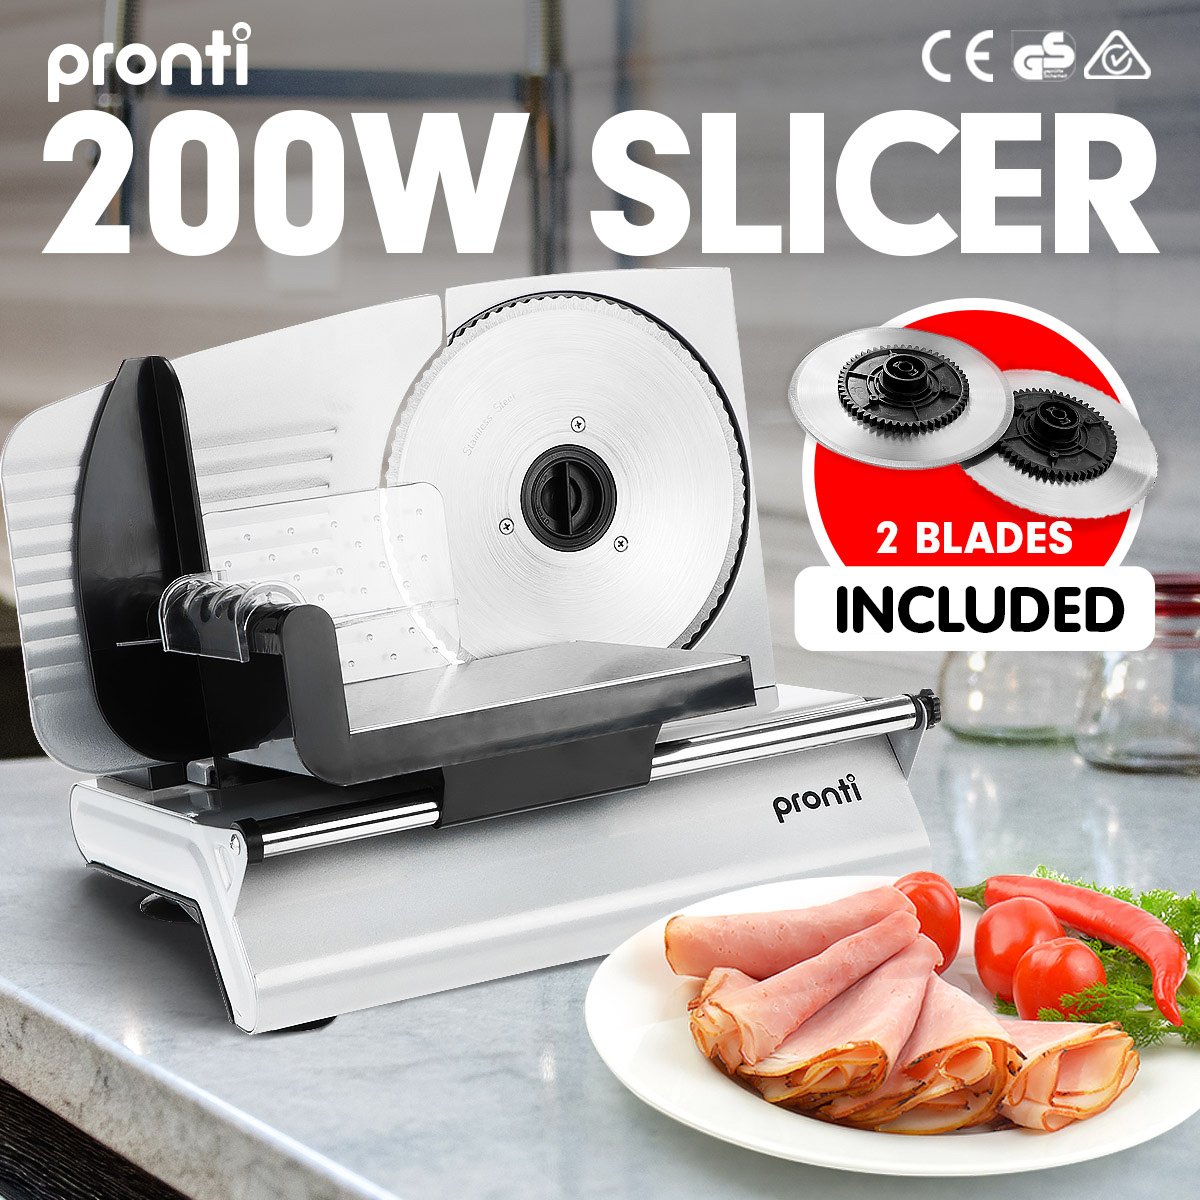 Pronti Deli and Food Electric Meat Slicer 200W Blades Processor 2